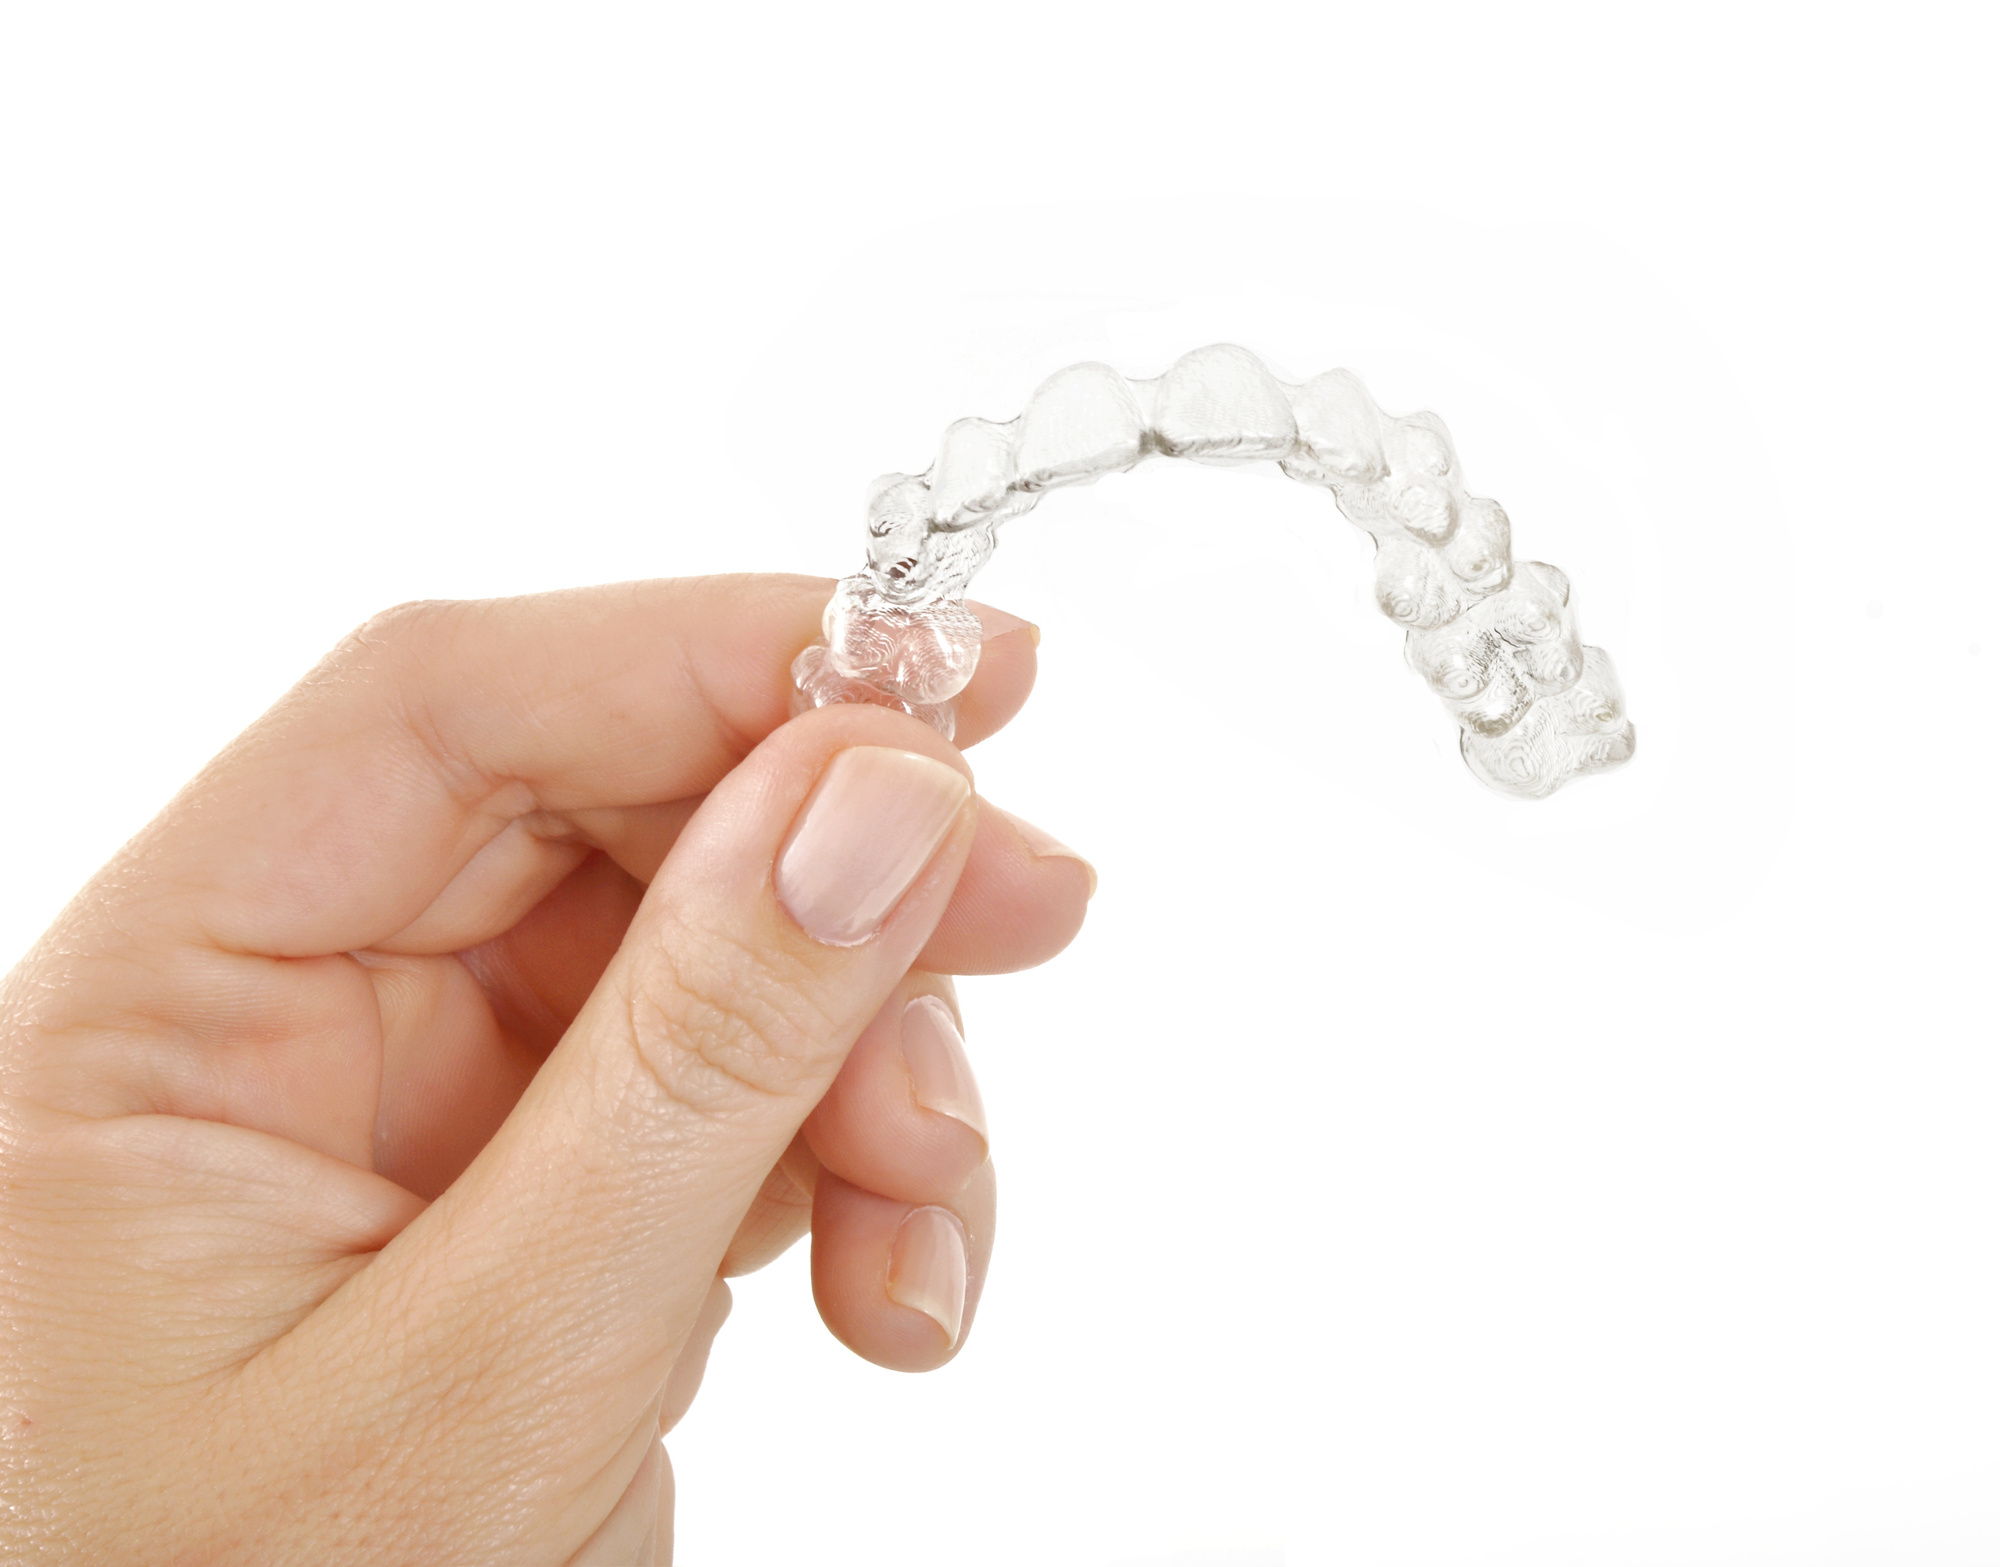 Keeping your Invisalign clean and damage-free requires knowing what not to do. Here are common mistakes in Invisalign maintenance and how to avoid them.